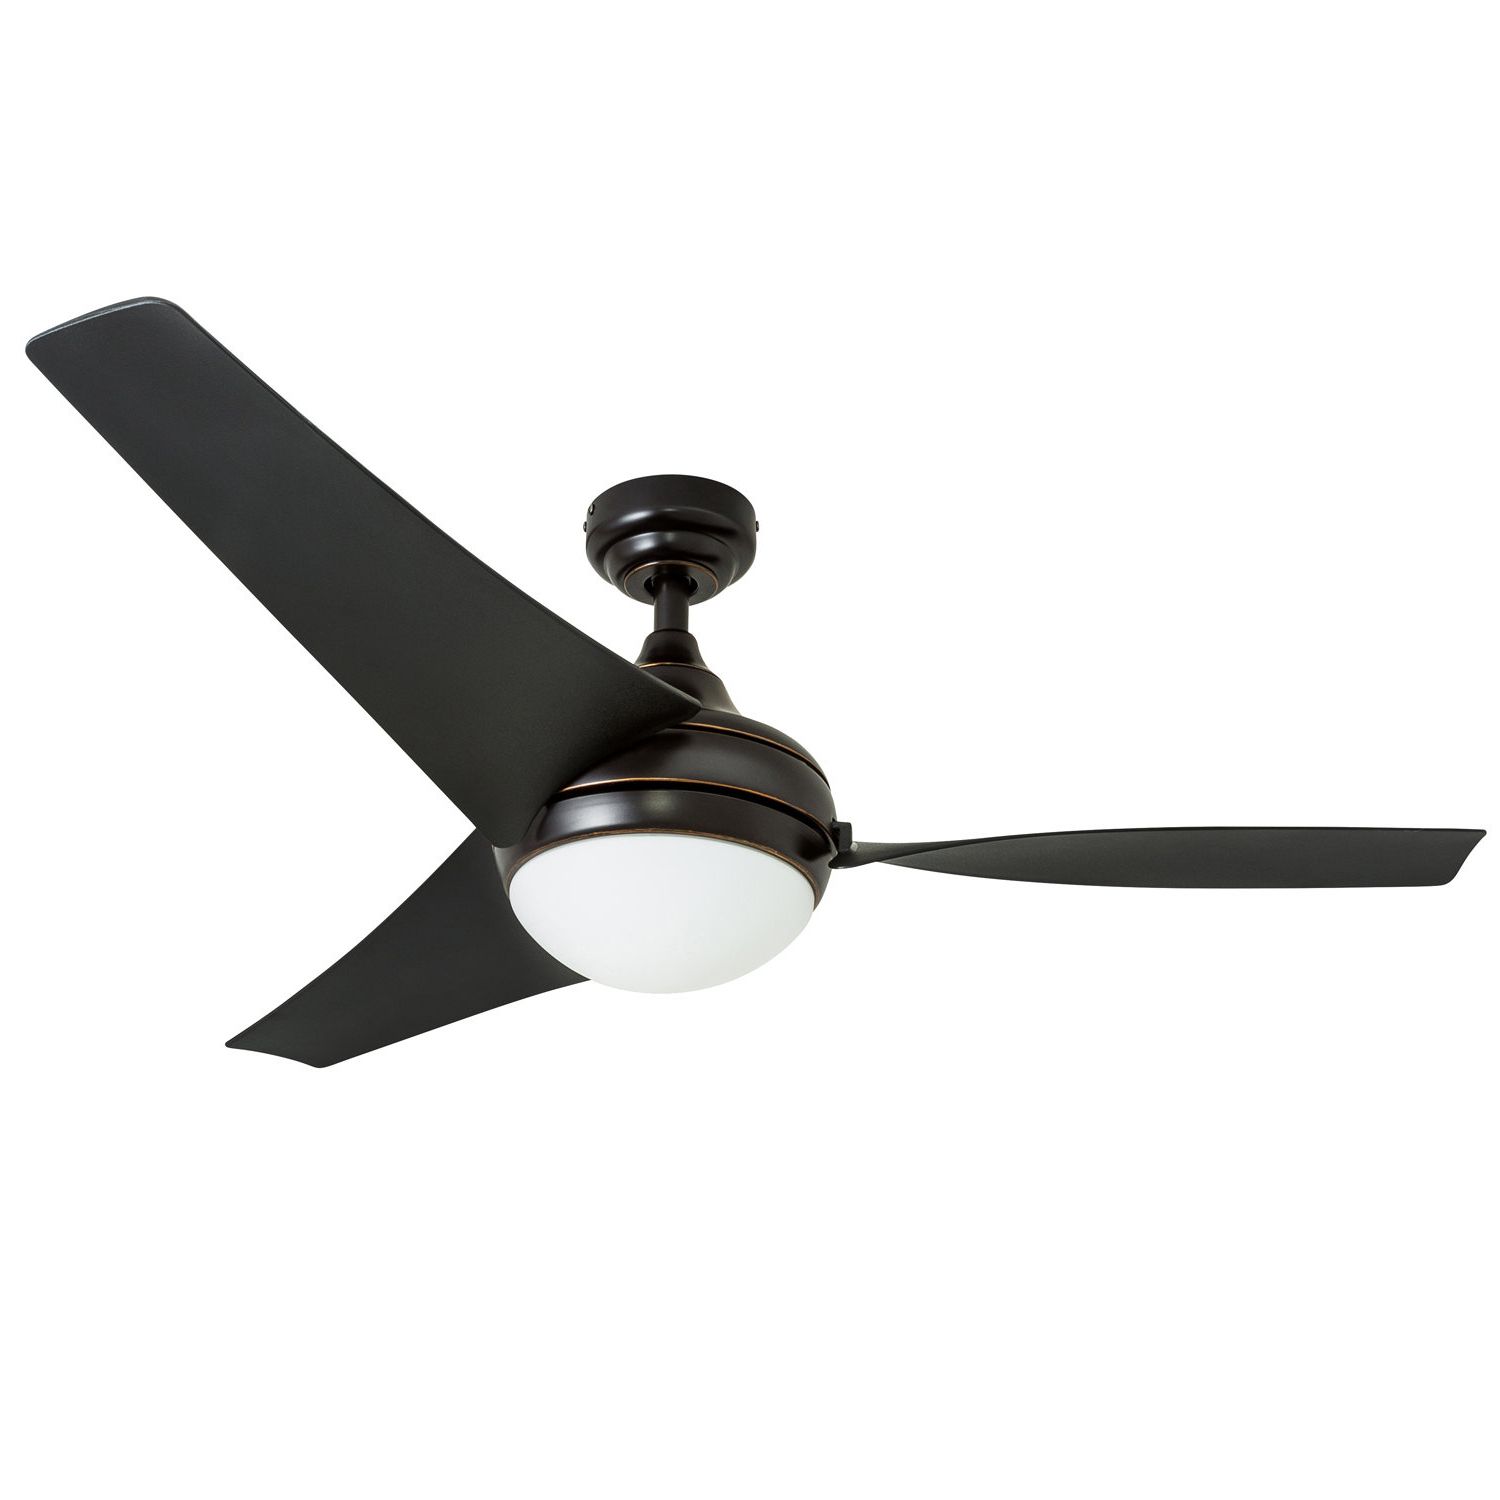 52" Schall 3 Blade Led Ceiling Fan With Remote For Famous Heskett 3 Blade Led Ceiling Fans (View 3 of 20)